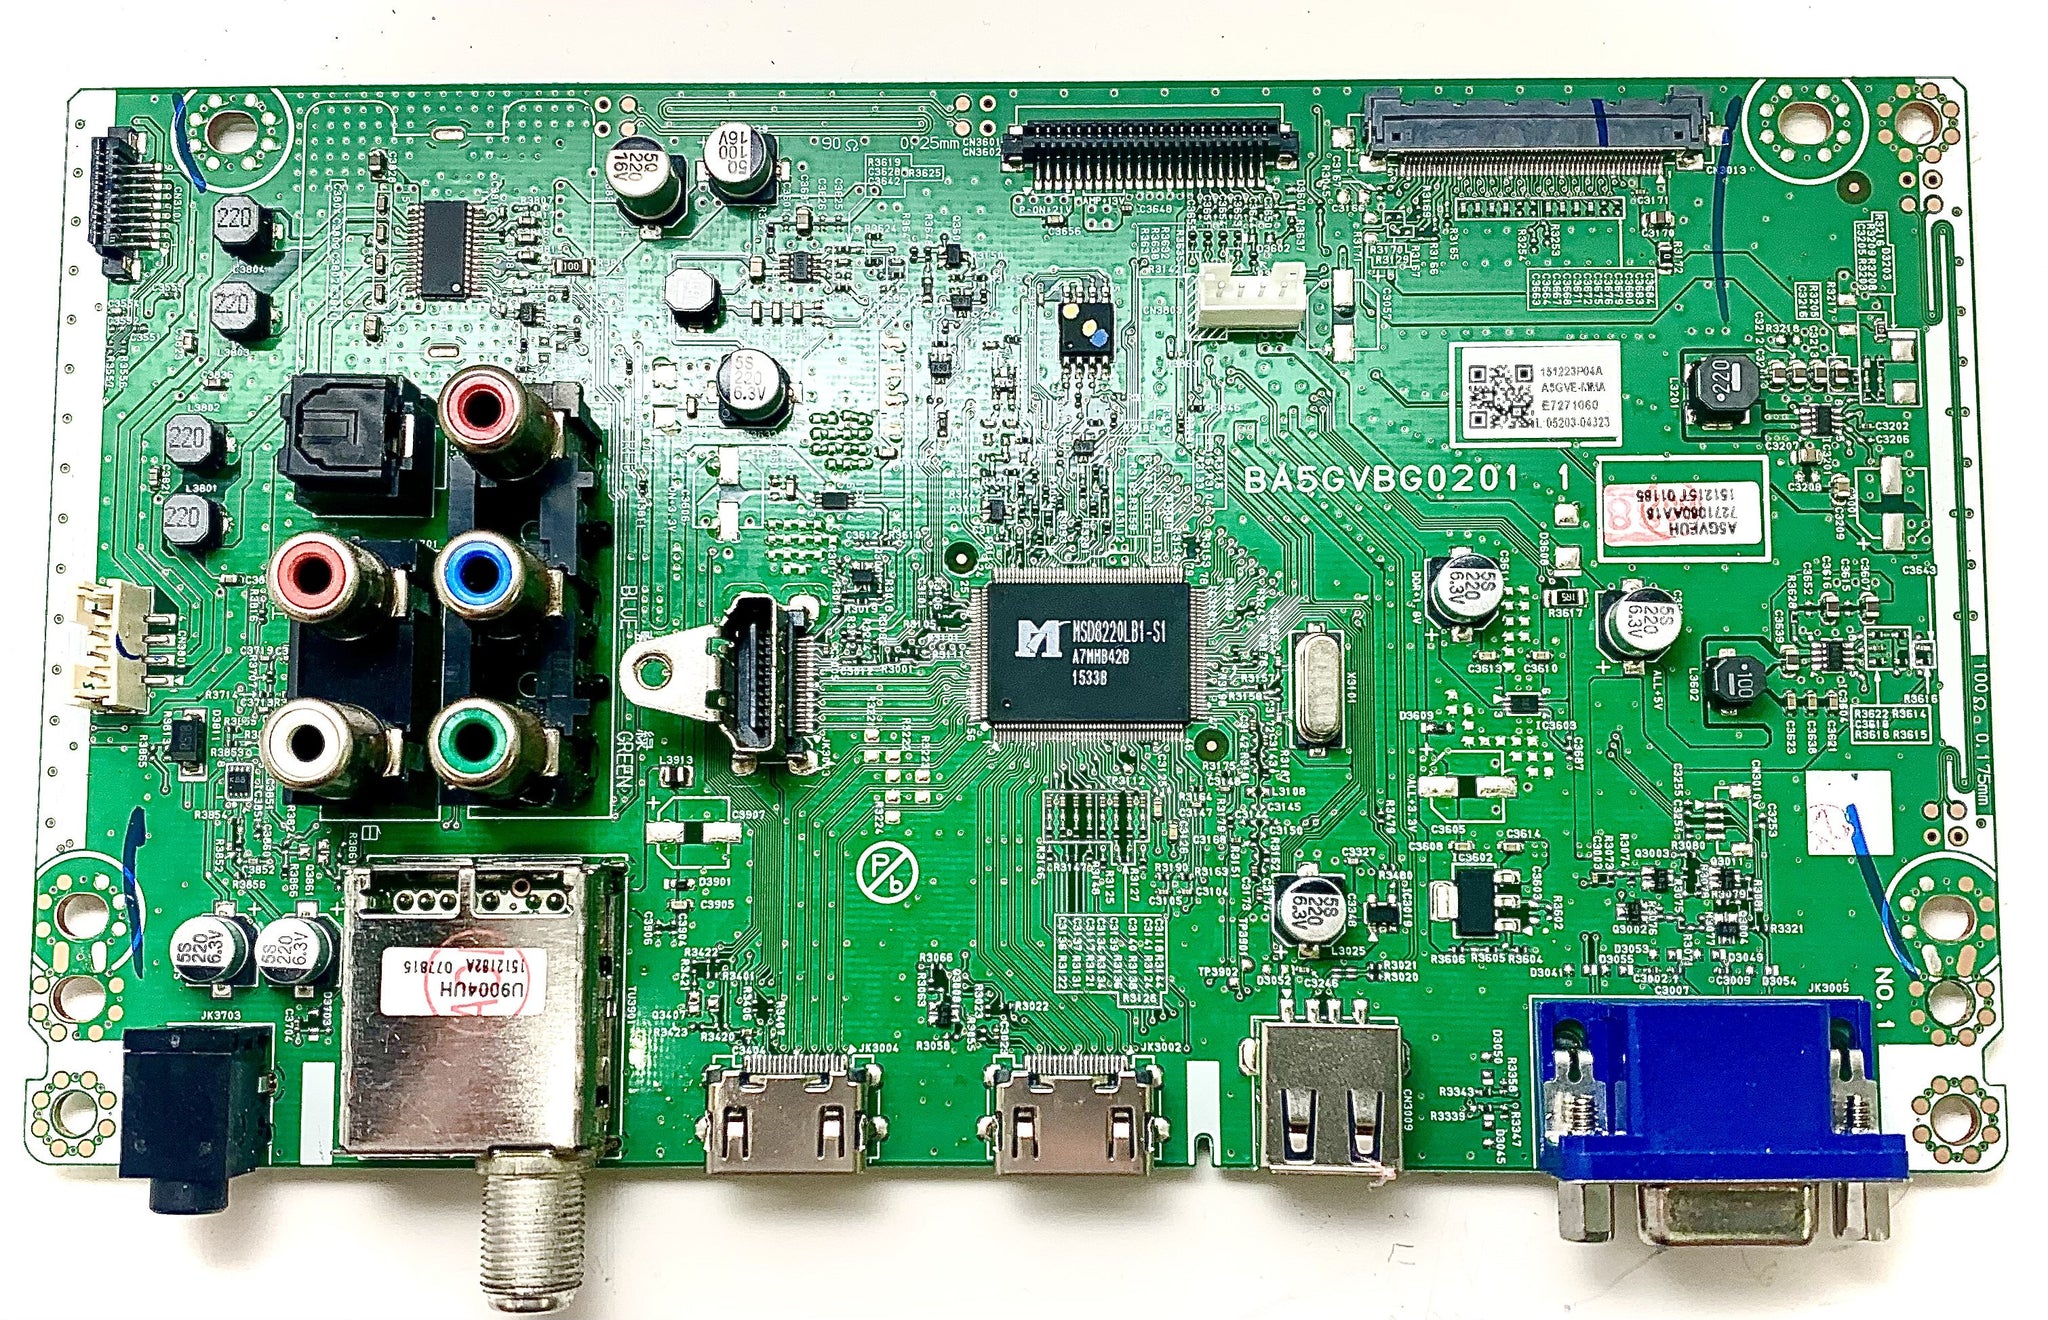 Sanyo A5GVEMMA-001 Main Board for FW43D25F (DS1 serial)